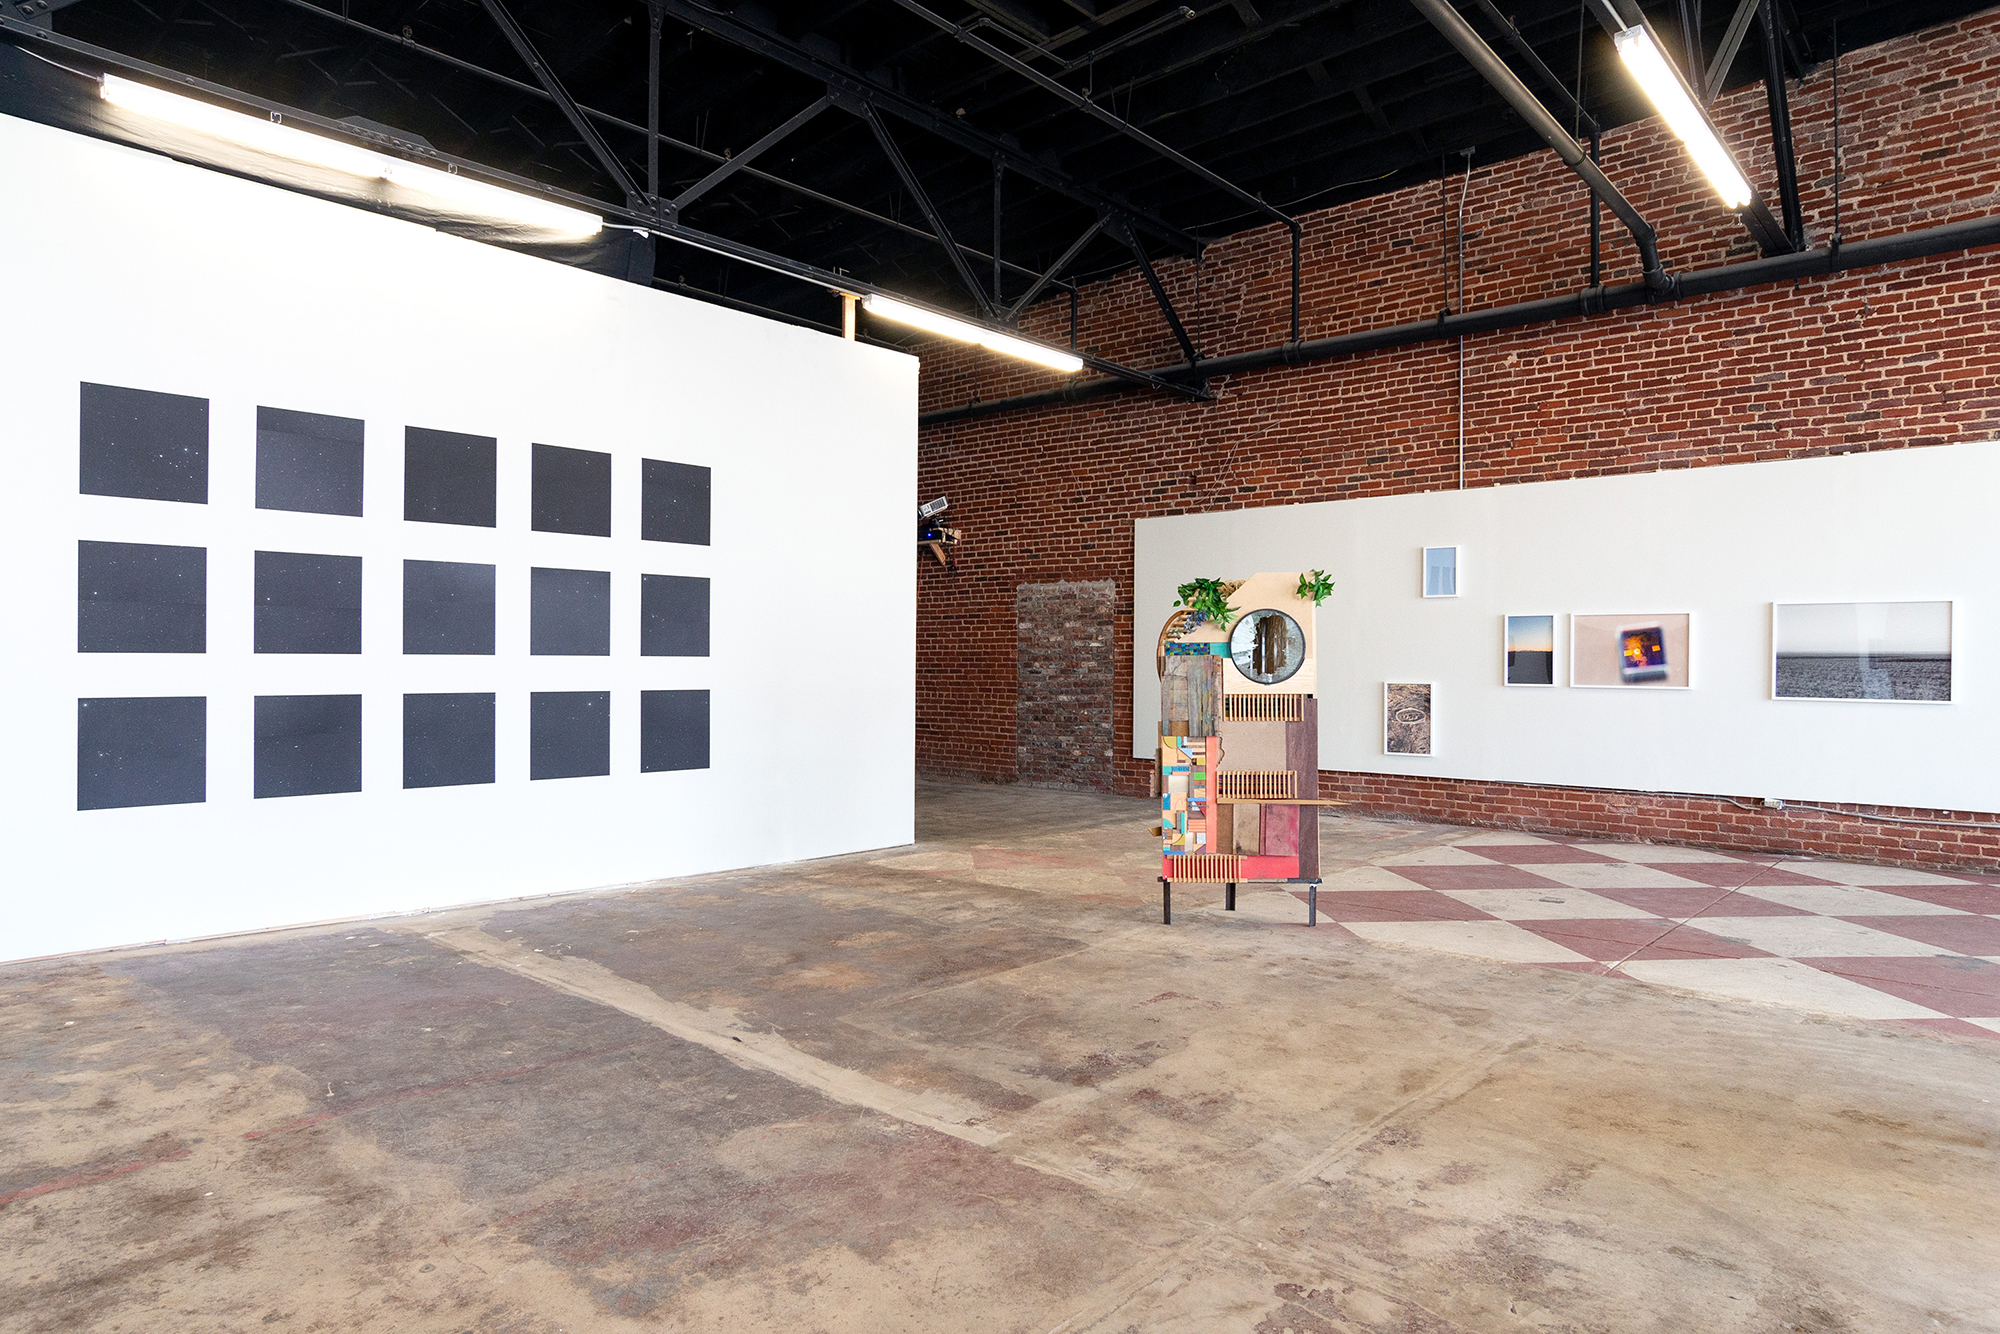  Installation view. Group exhibition,  Fluctuating Meridians,  at Stoveworks, Chattanooga, TN. February 2019. Sculpture in foreground by Peter Hoffecker Mejia. 